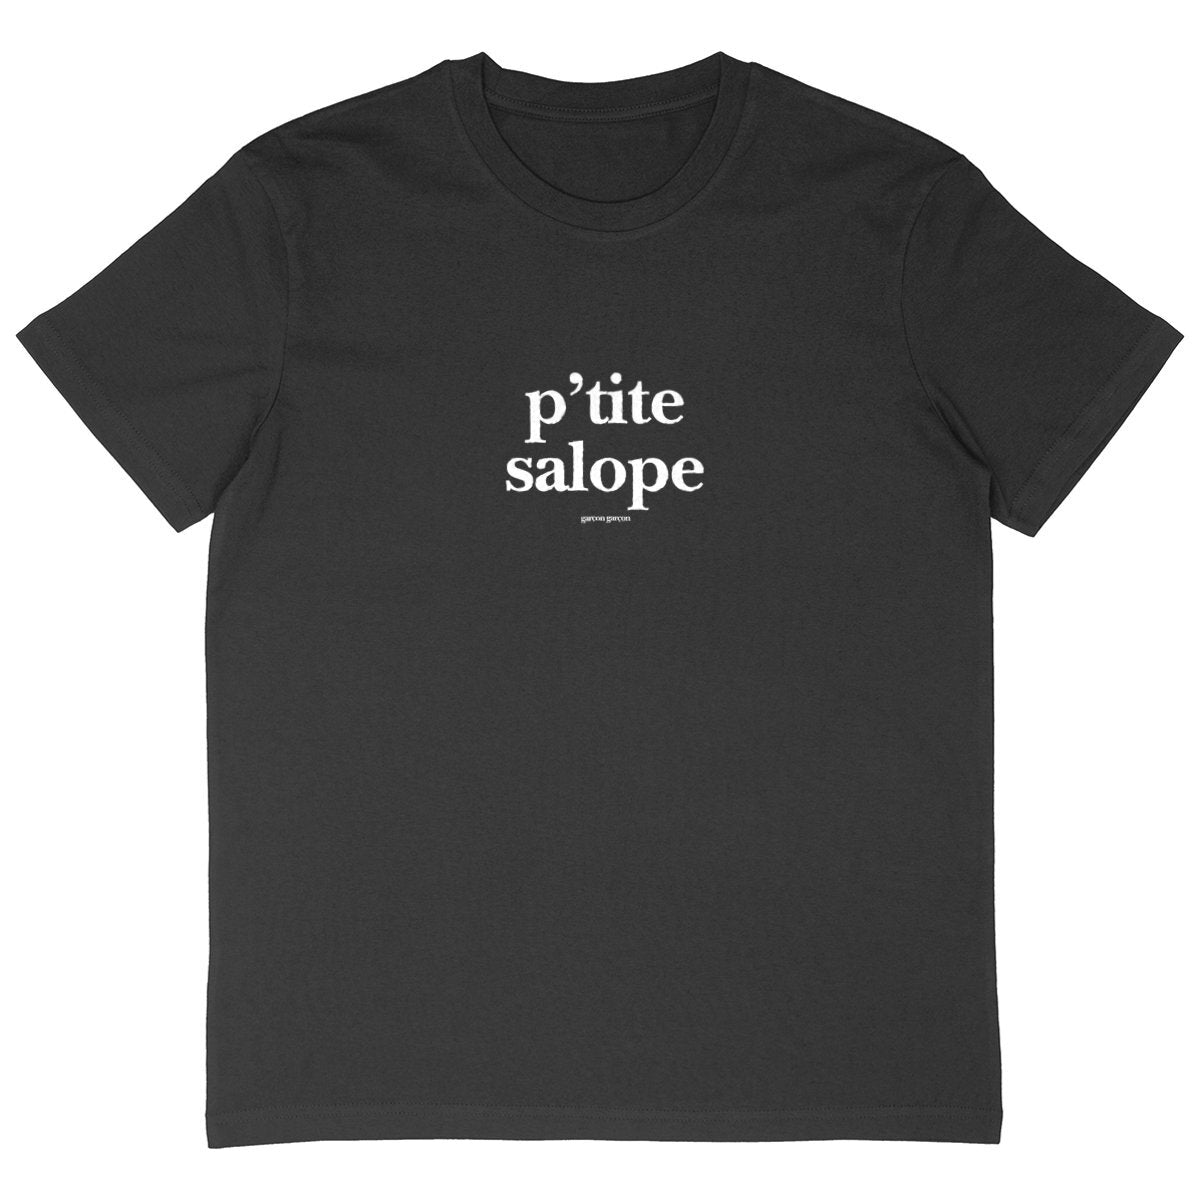 p'tite salope tee oversized. garçon garçon tee oversize BLACK. Dive into the essence of Parisian cool with this oversized tee. The subtle 'garçon garçon' signature whispers a chic narrative, offering a slice of the city's famed elegance. Perfect for those who speak style with simplicity.